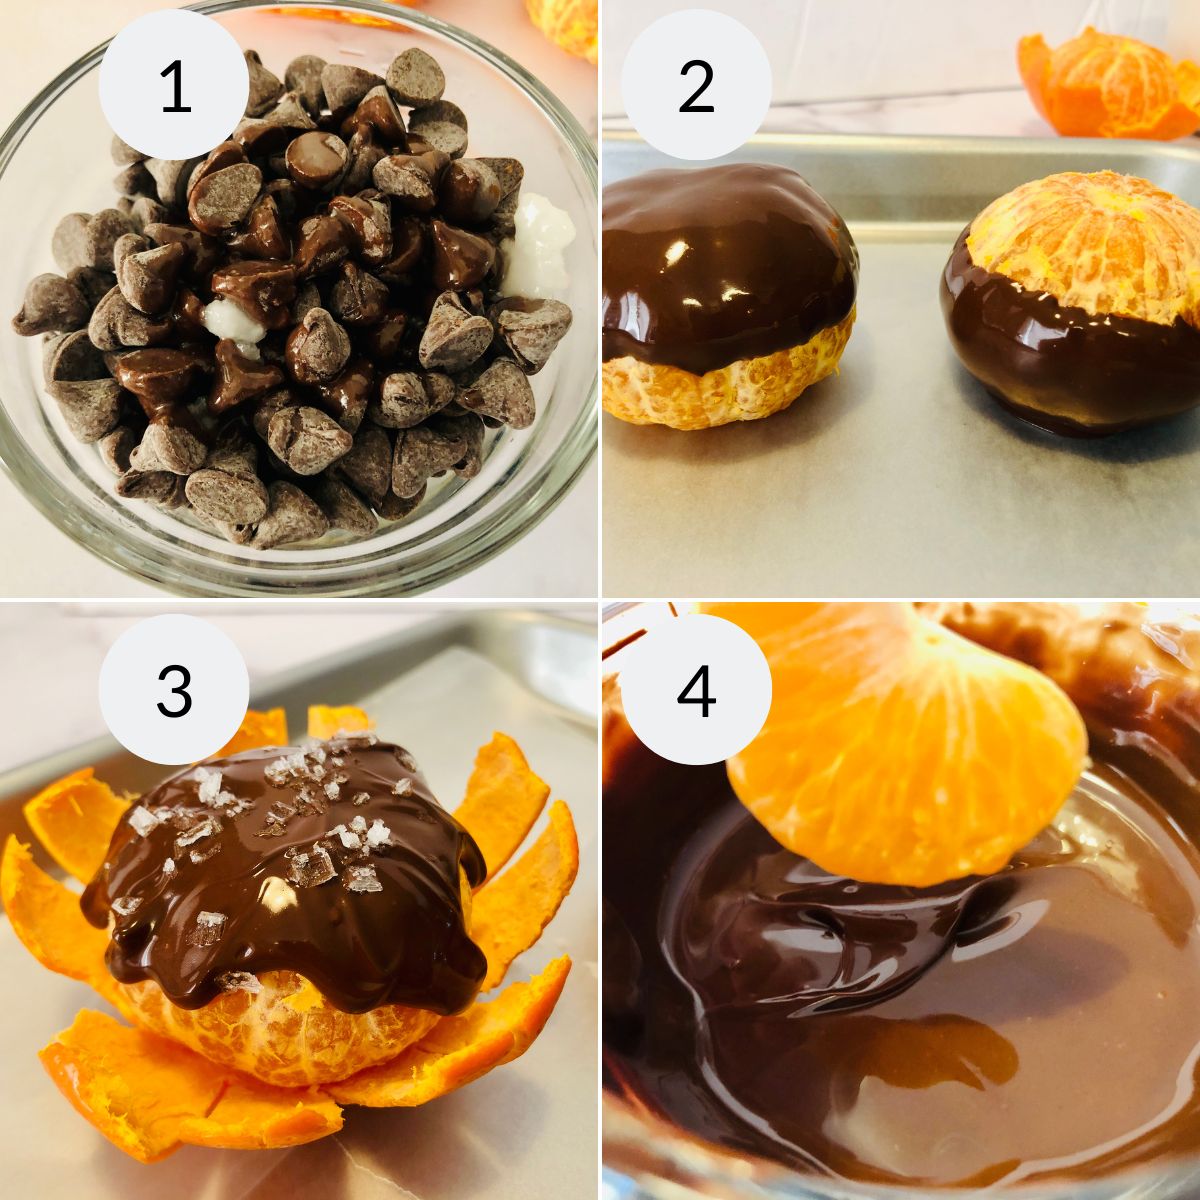 Melting the chocolate and dipping the oranges in.